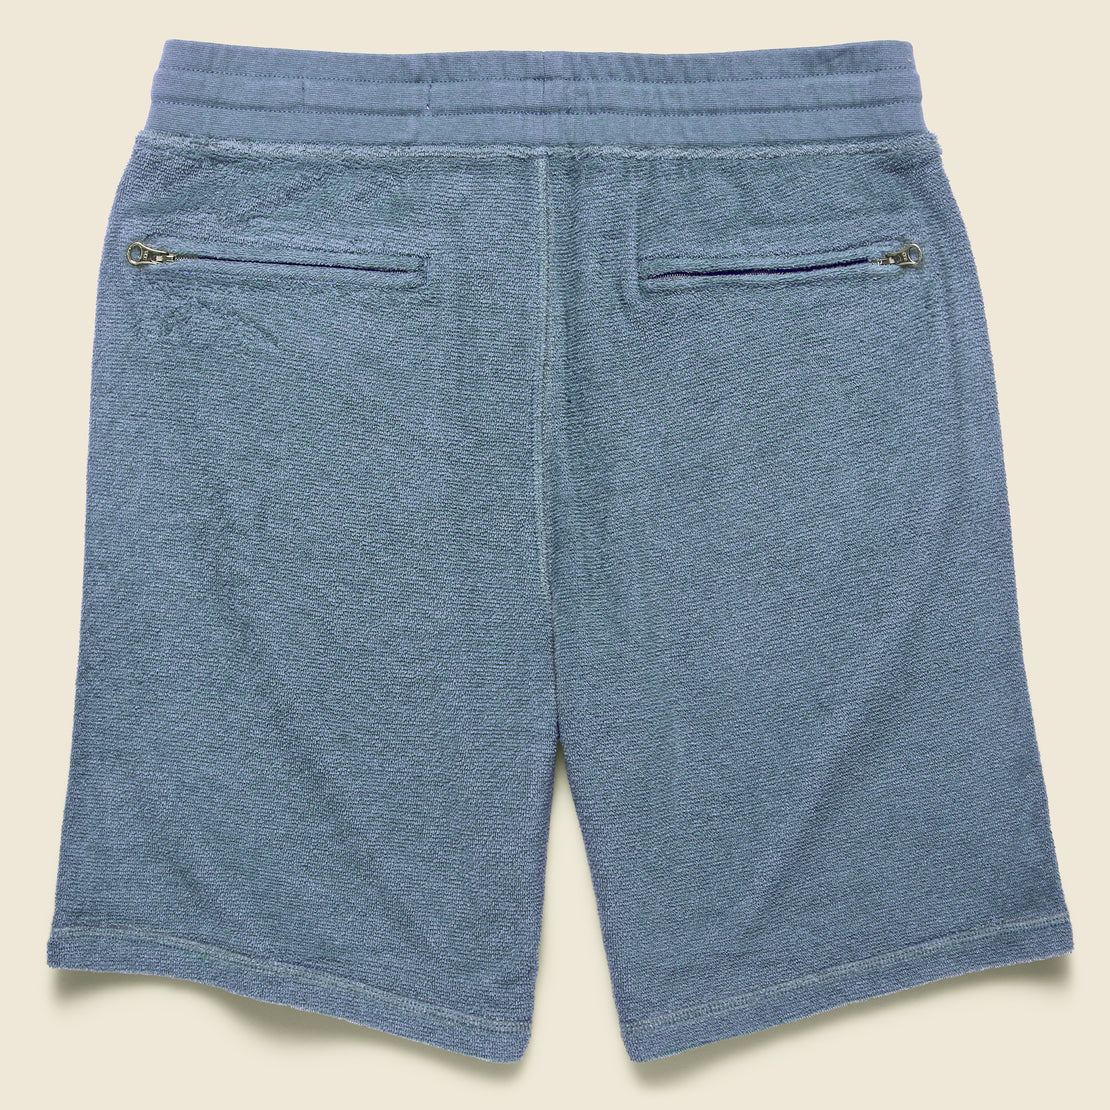 Hightide Sweatshort - Cornflower - Outerknown - STAG Provisions - Shorts - Lounge